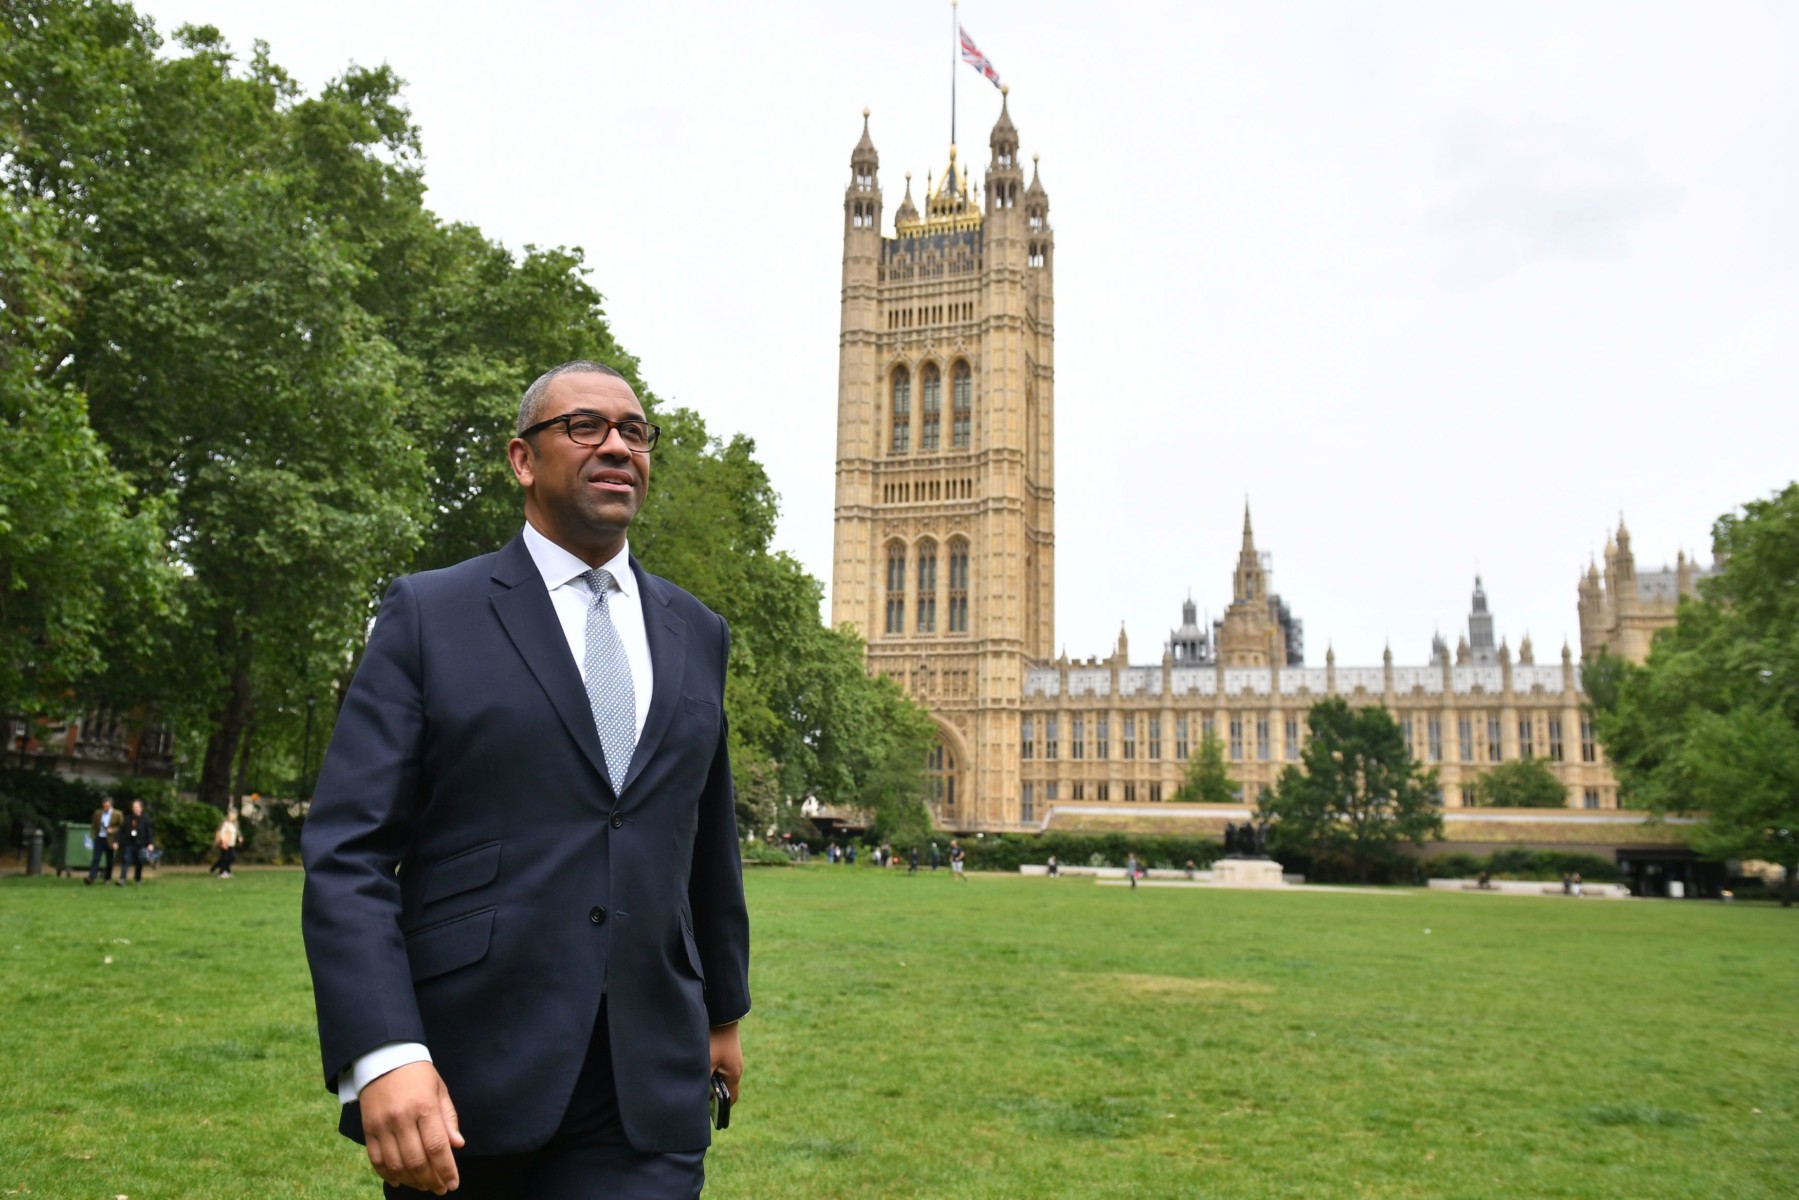 James Cleverly put his name forward to replace Theresa May on May 28, but backed out on June 4